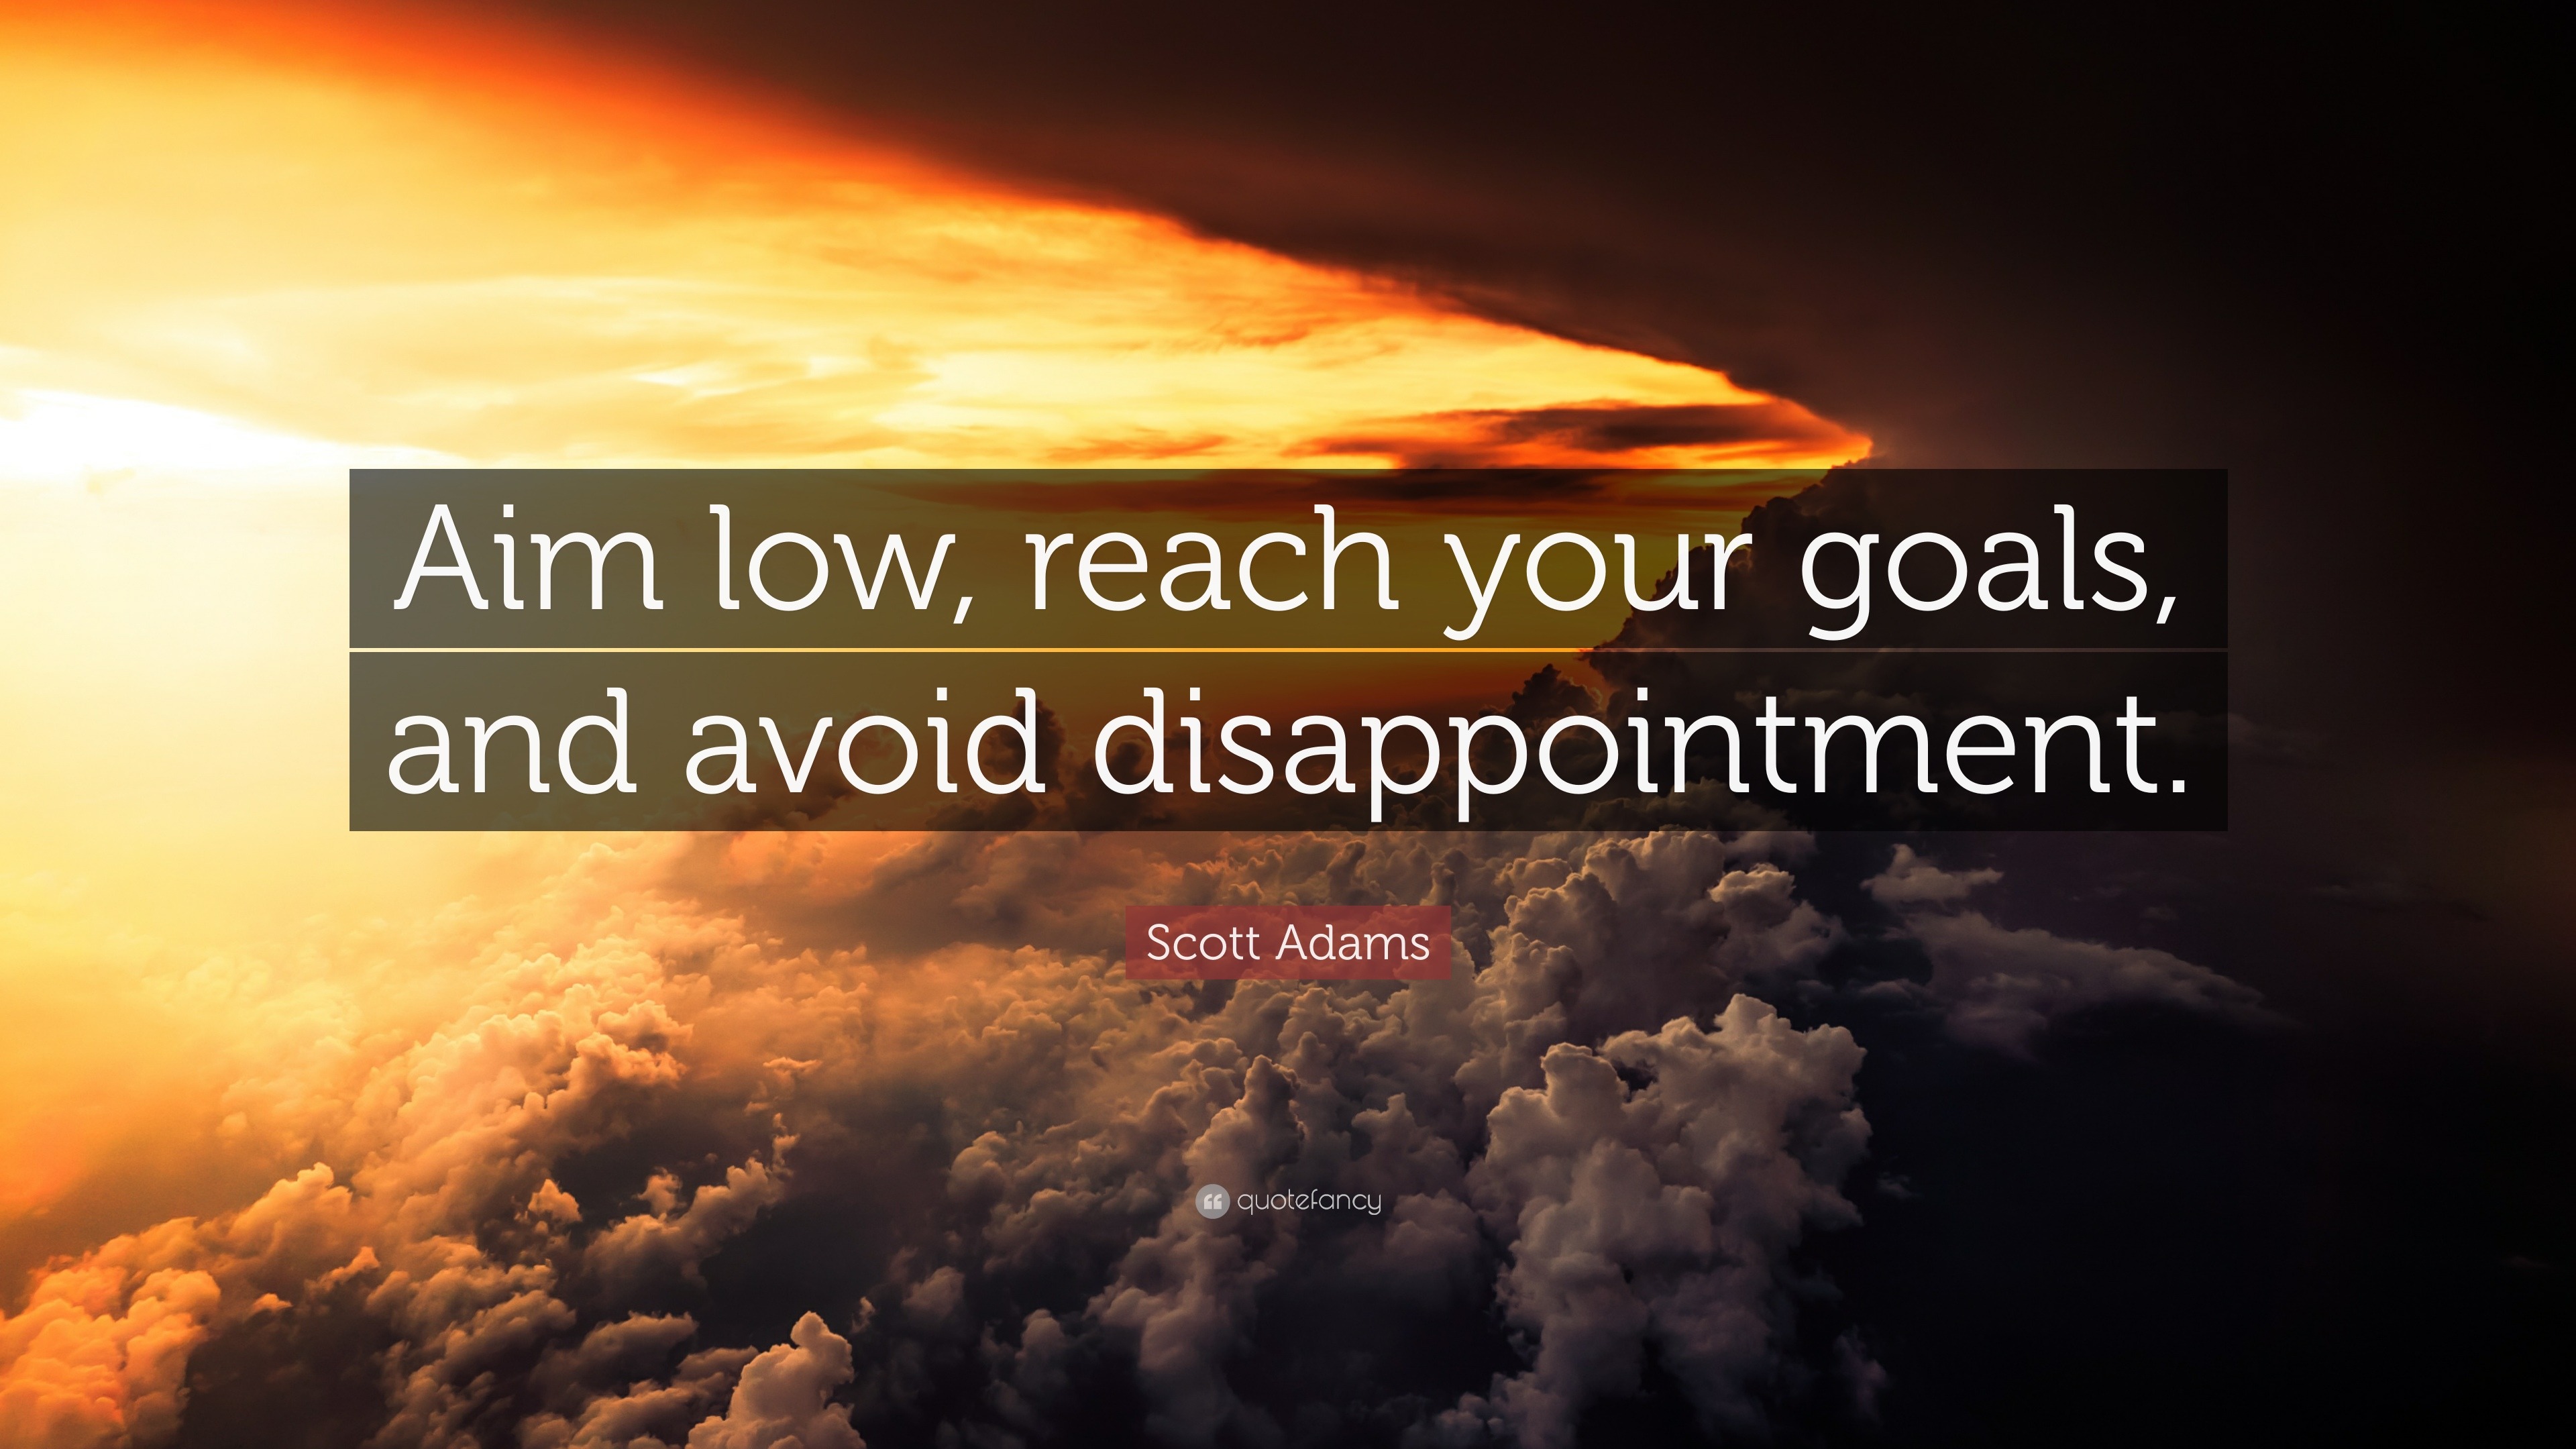 Scott Adams Quote “Aim low, reach your goals, and avoid disappointment